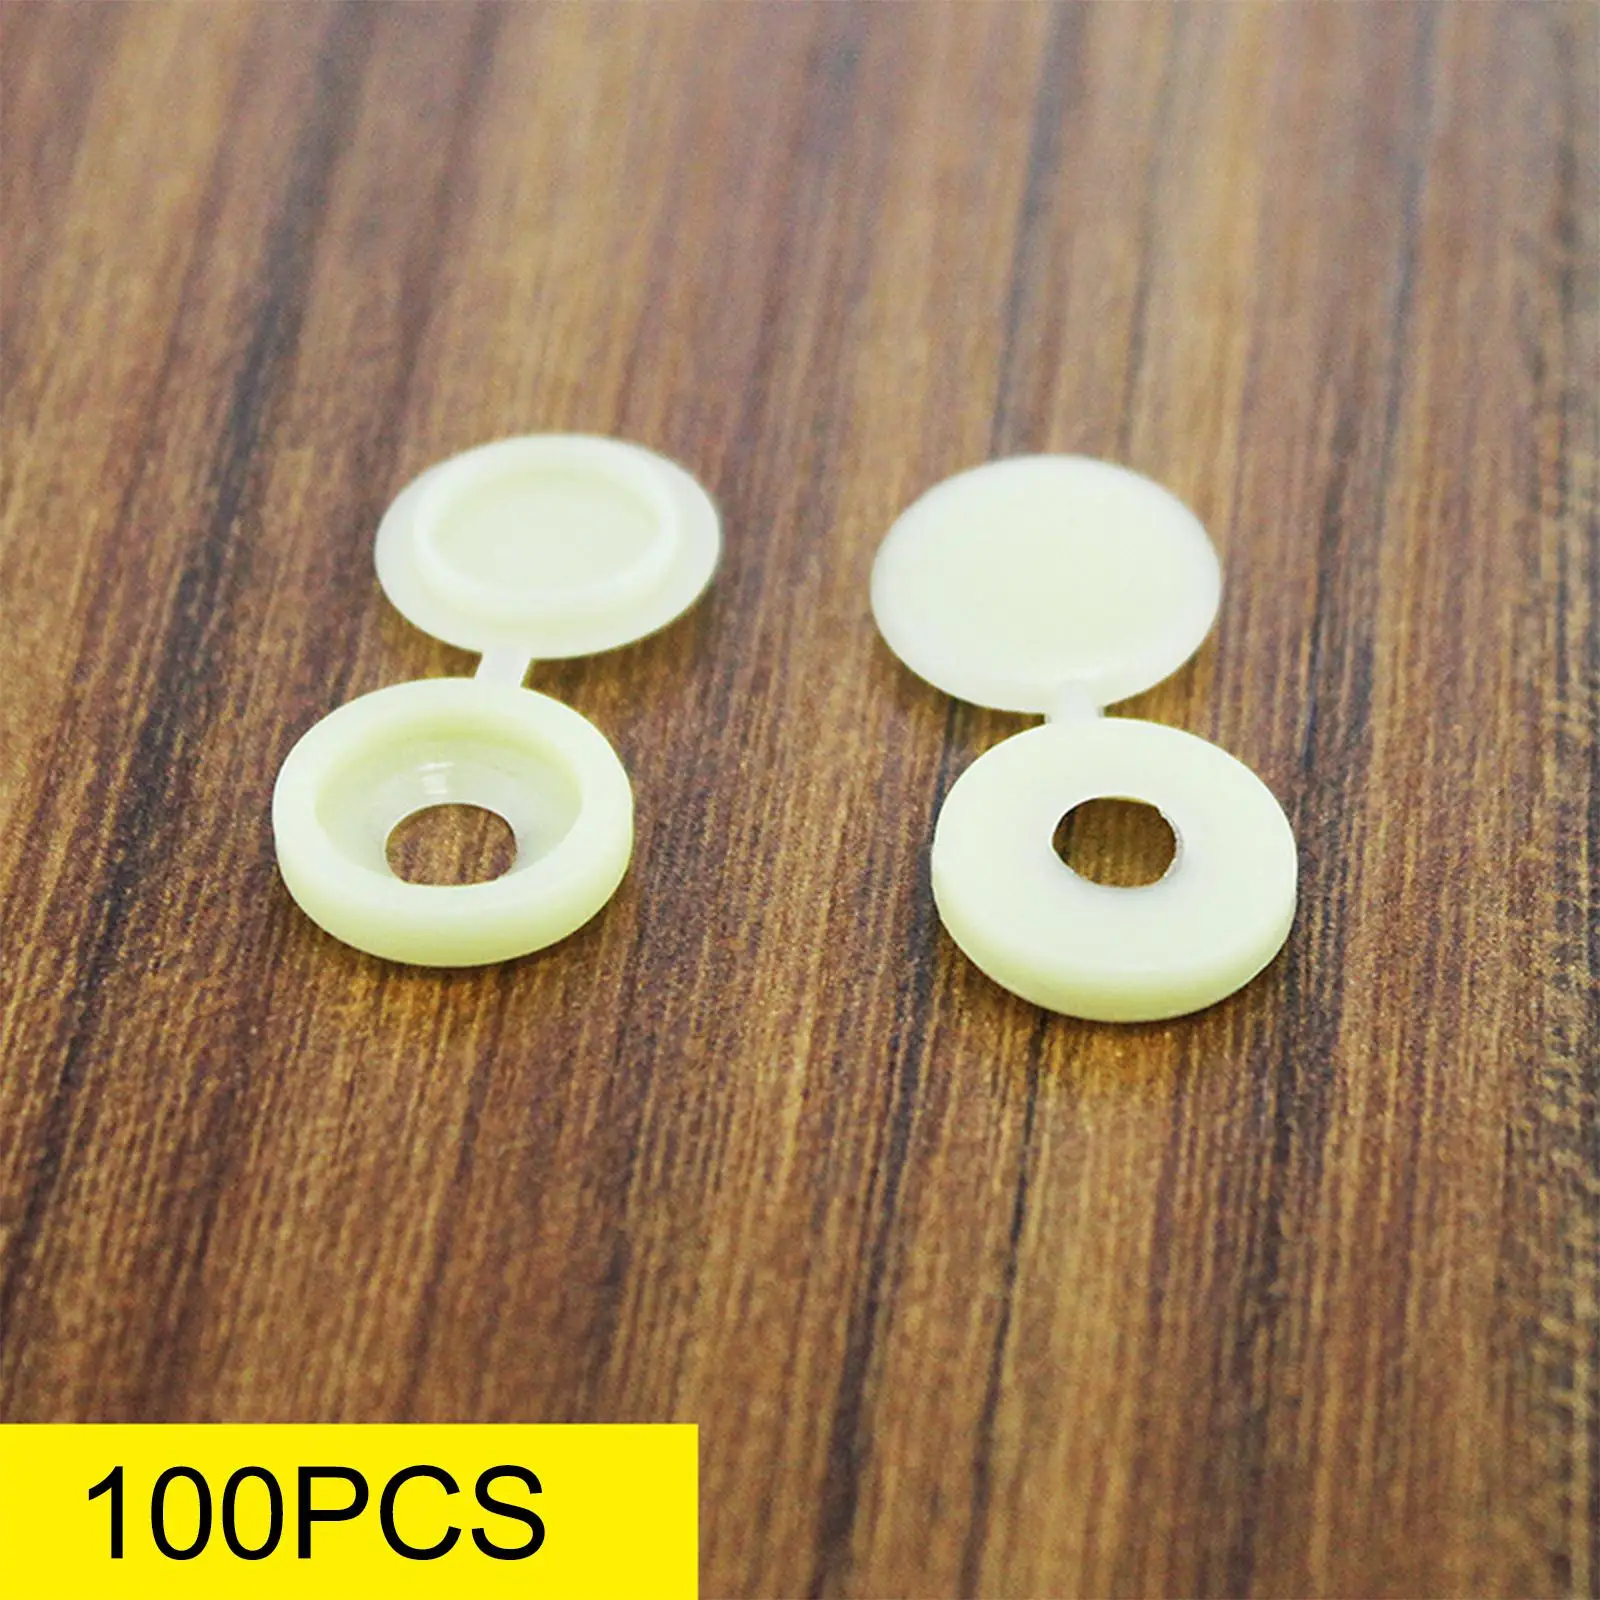 100 Pieces Premium Screw Covers Screws Caps Portable Wear Resistant Decorative Soft for Replacement Tools Cabinet Yard Furniture